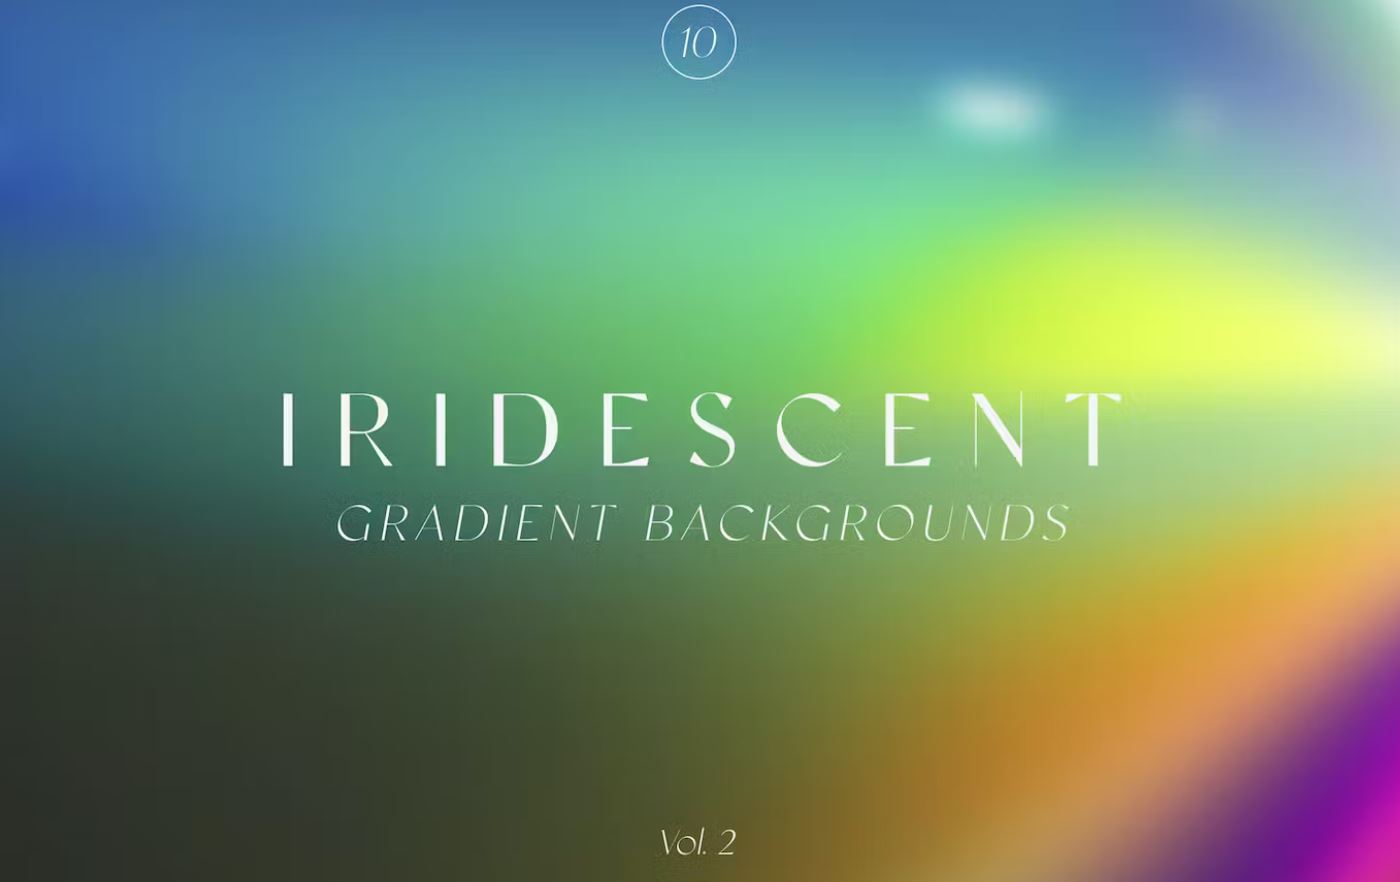 10 Iridescent style textured gradients backgrounds